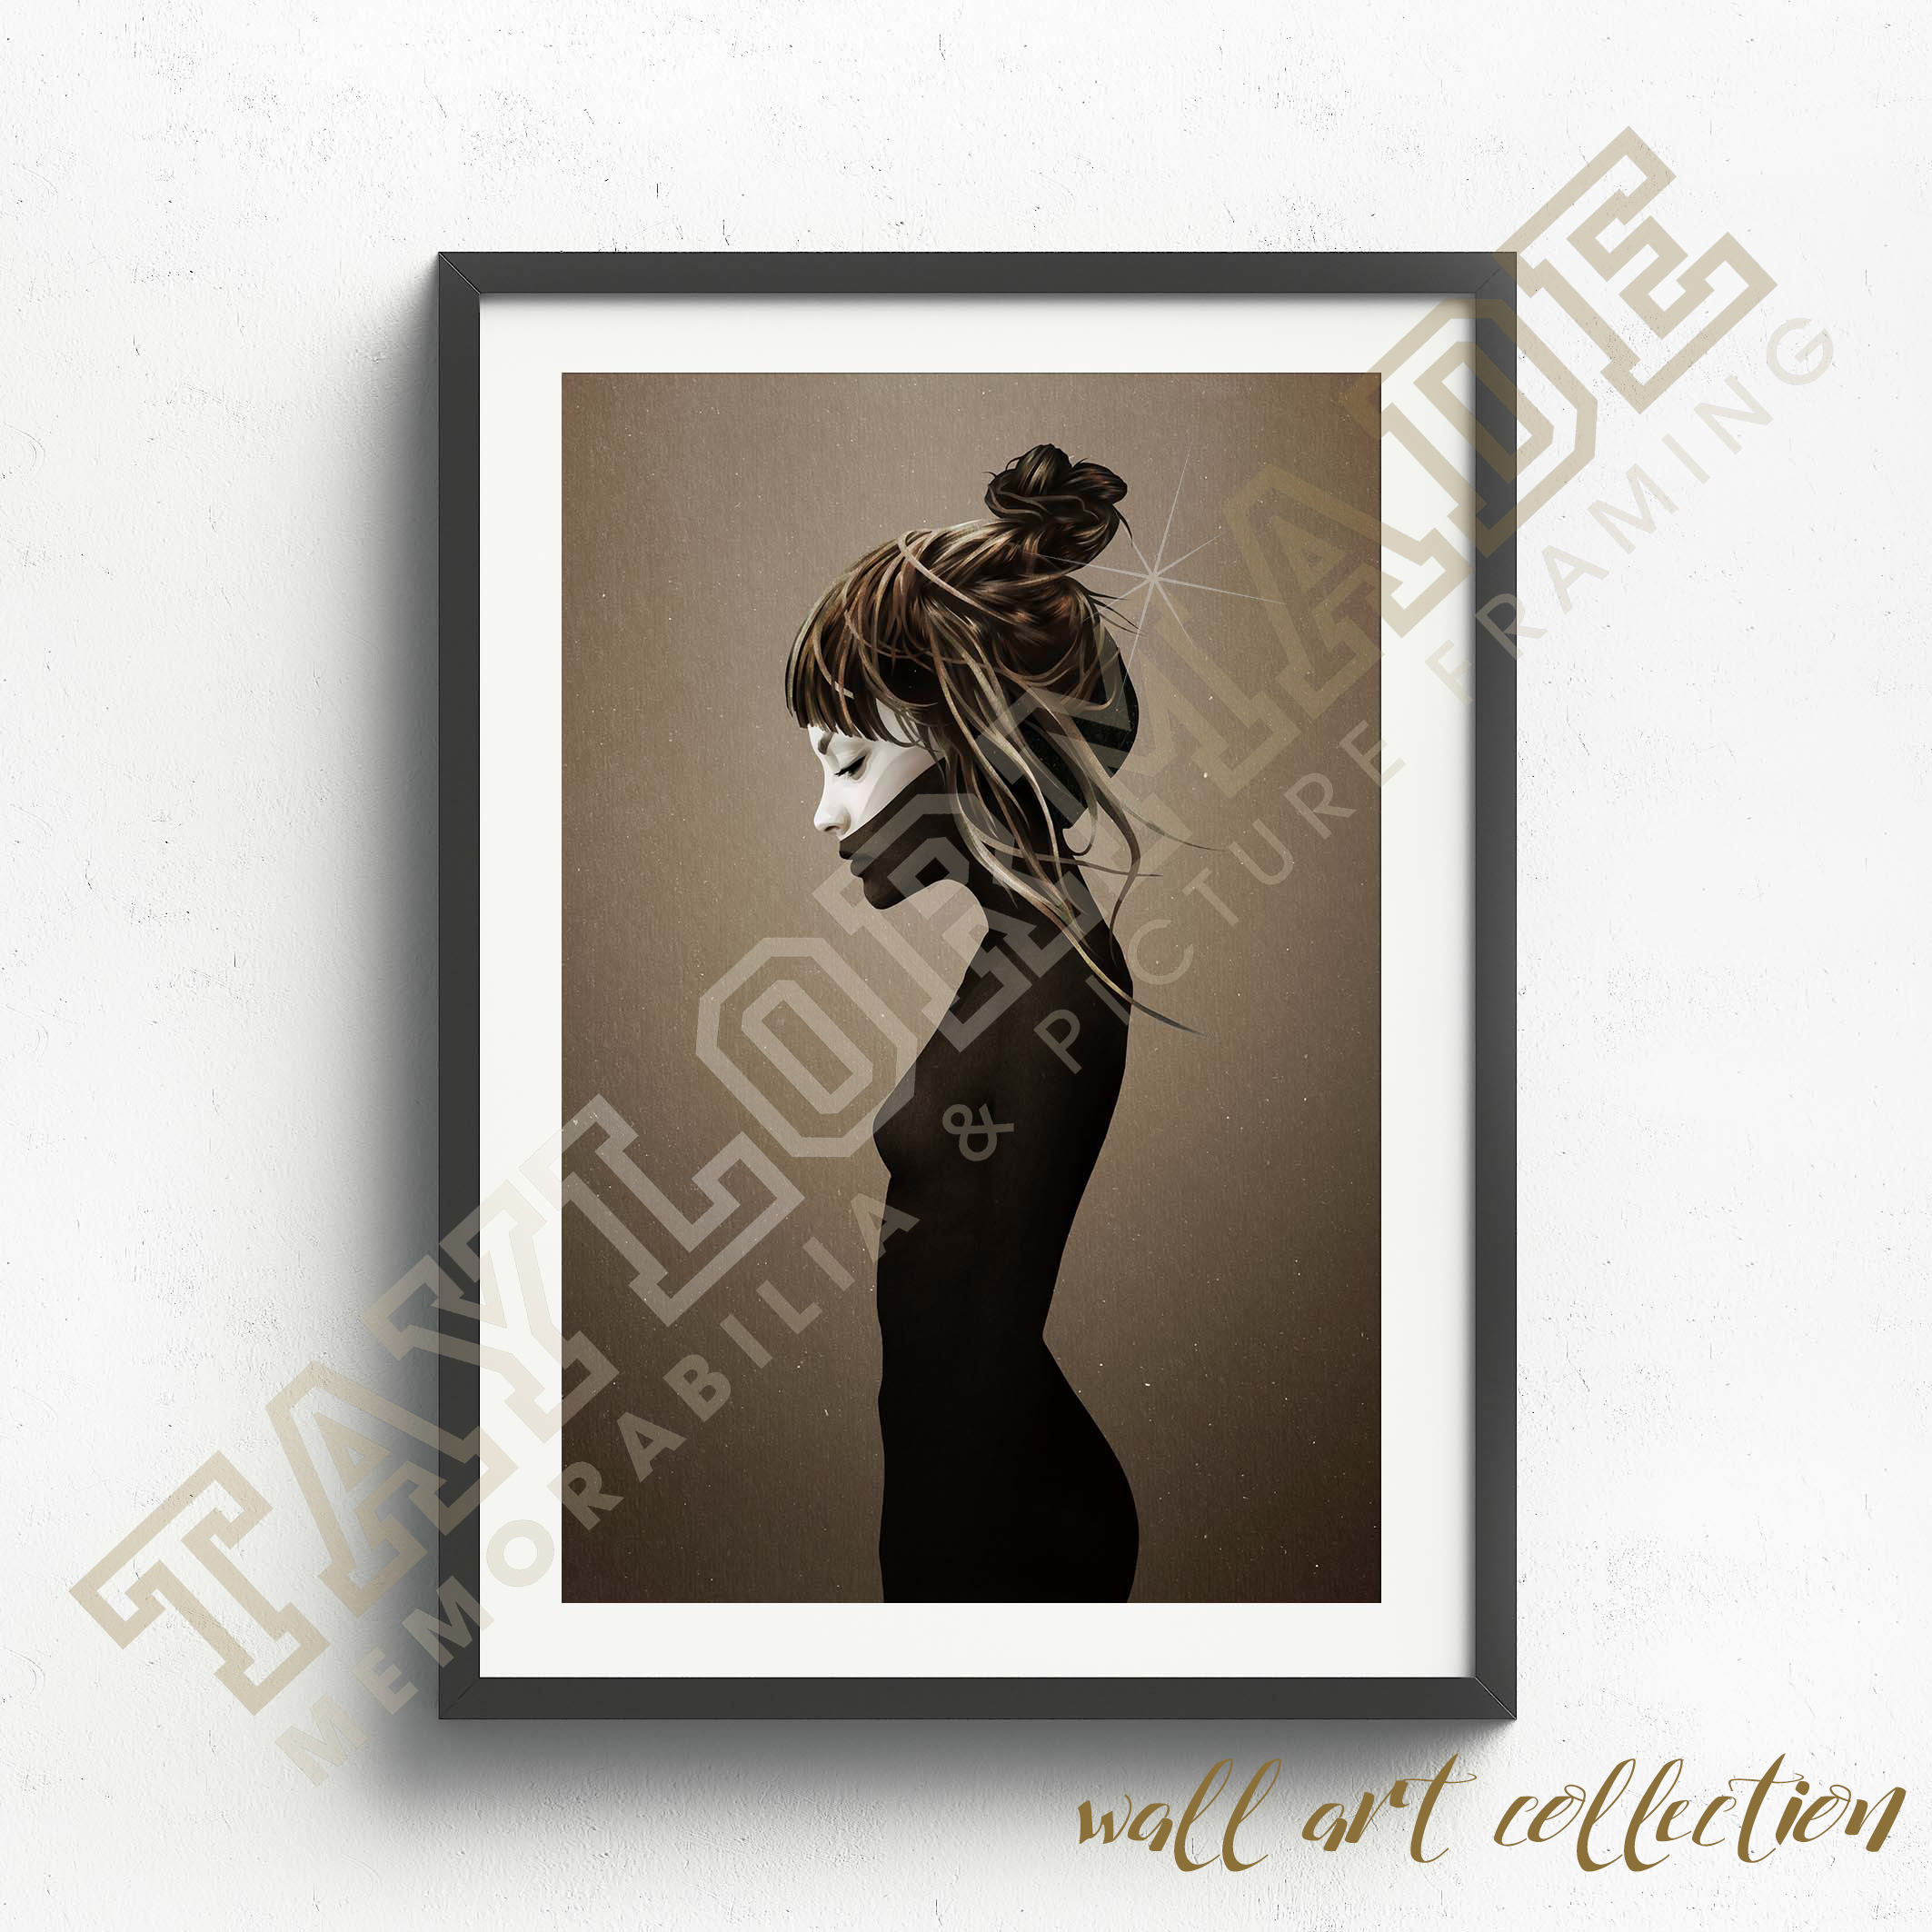 Wall Art Collection – The City